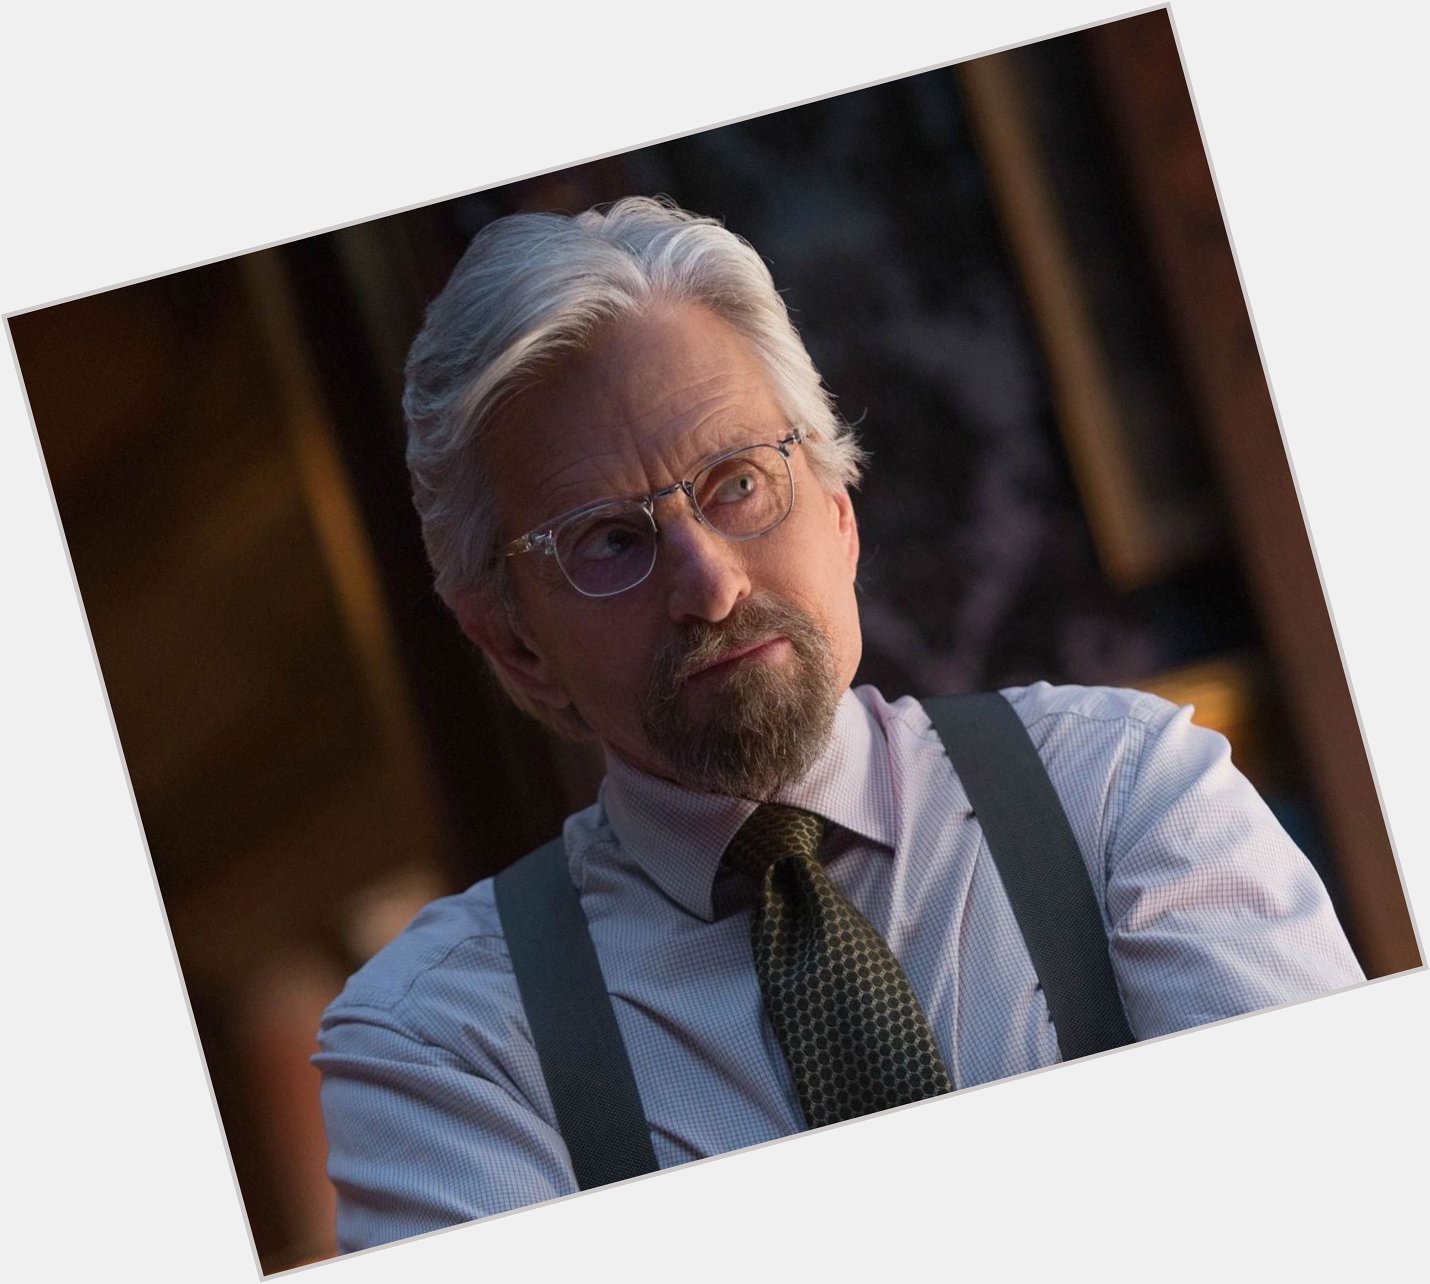 Happy birthday to Michael Douglas, who portrays Hank Pym in the Marvel Cinematic Universe. 